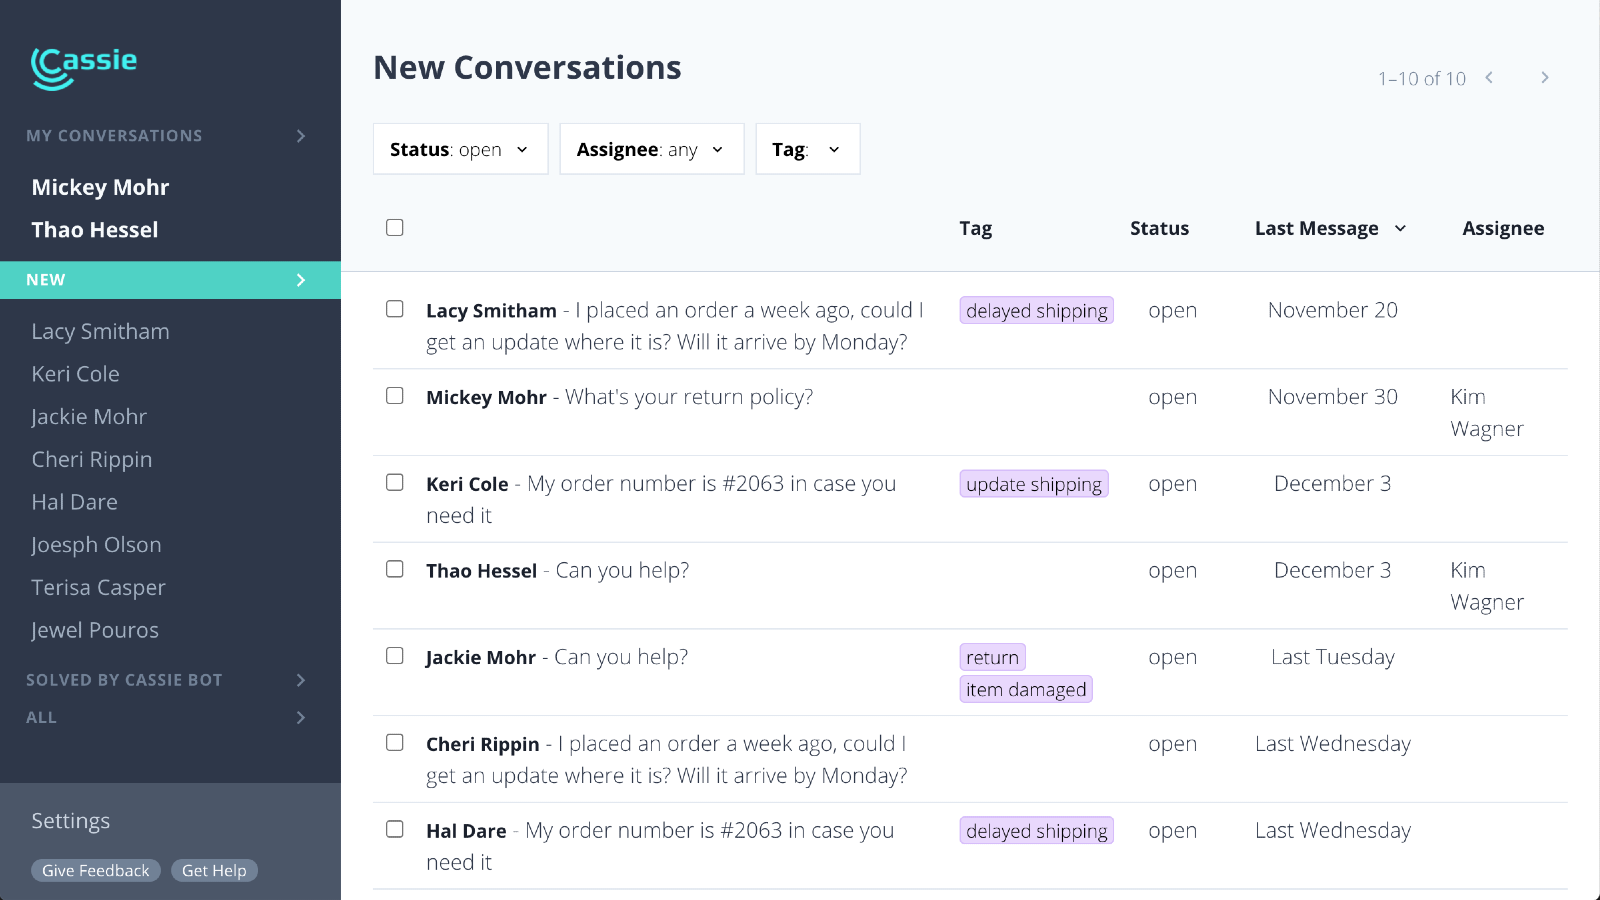 Quickly find and group conversations